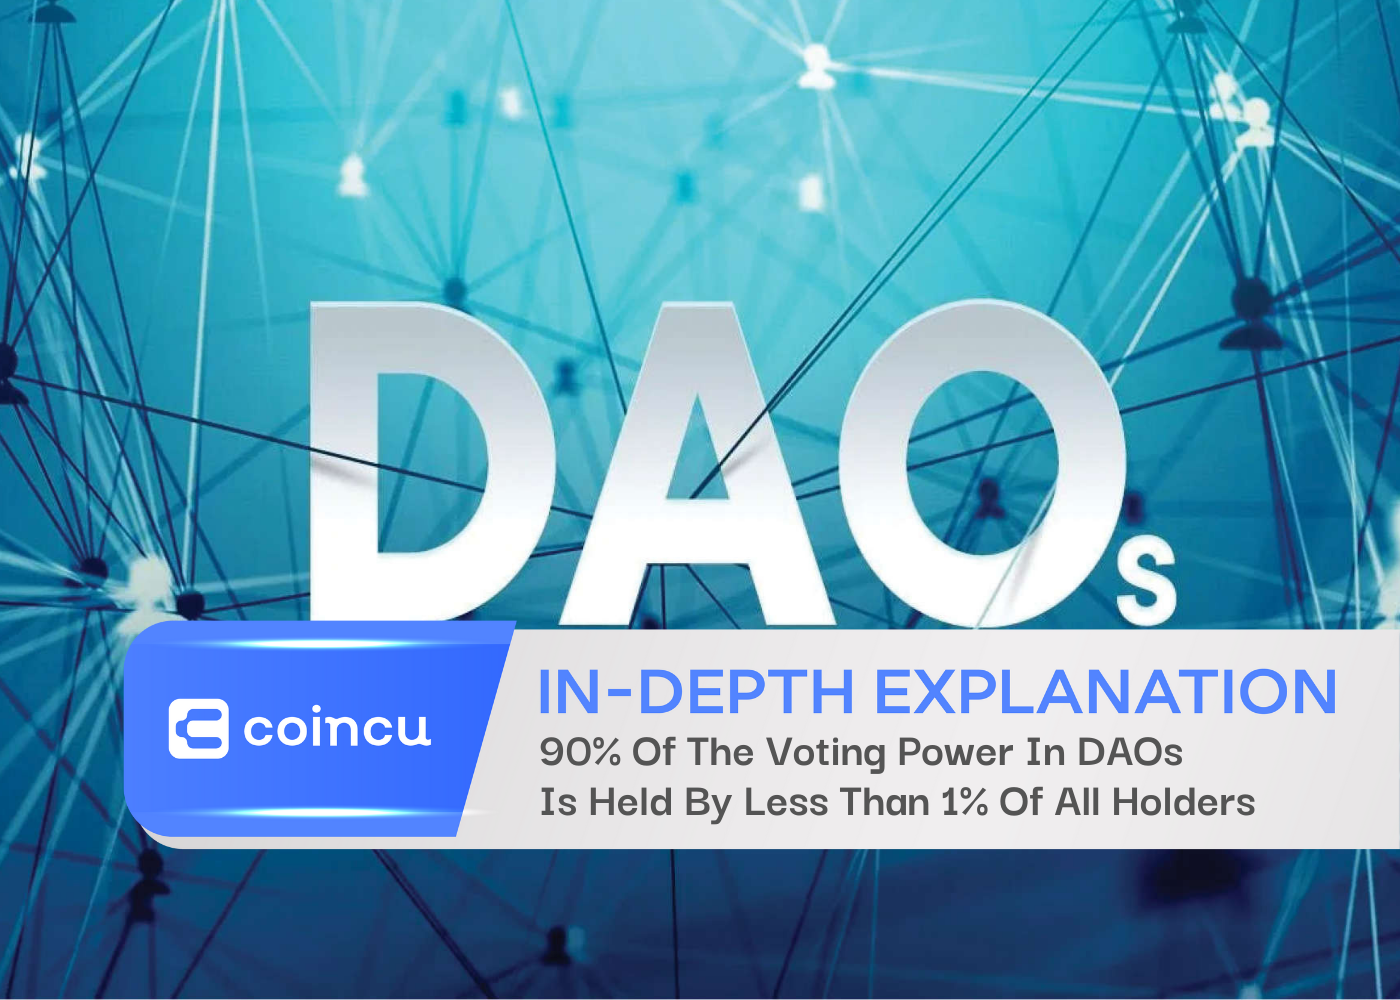 90 Of The Voting Power In DAOs